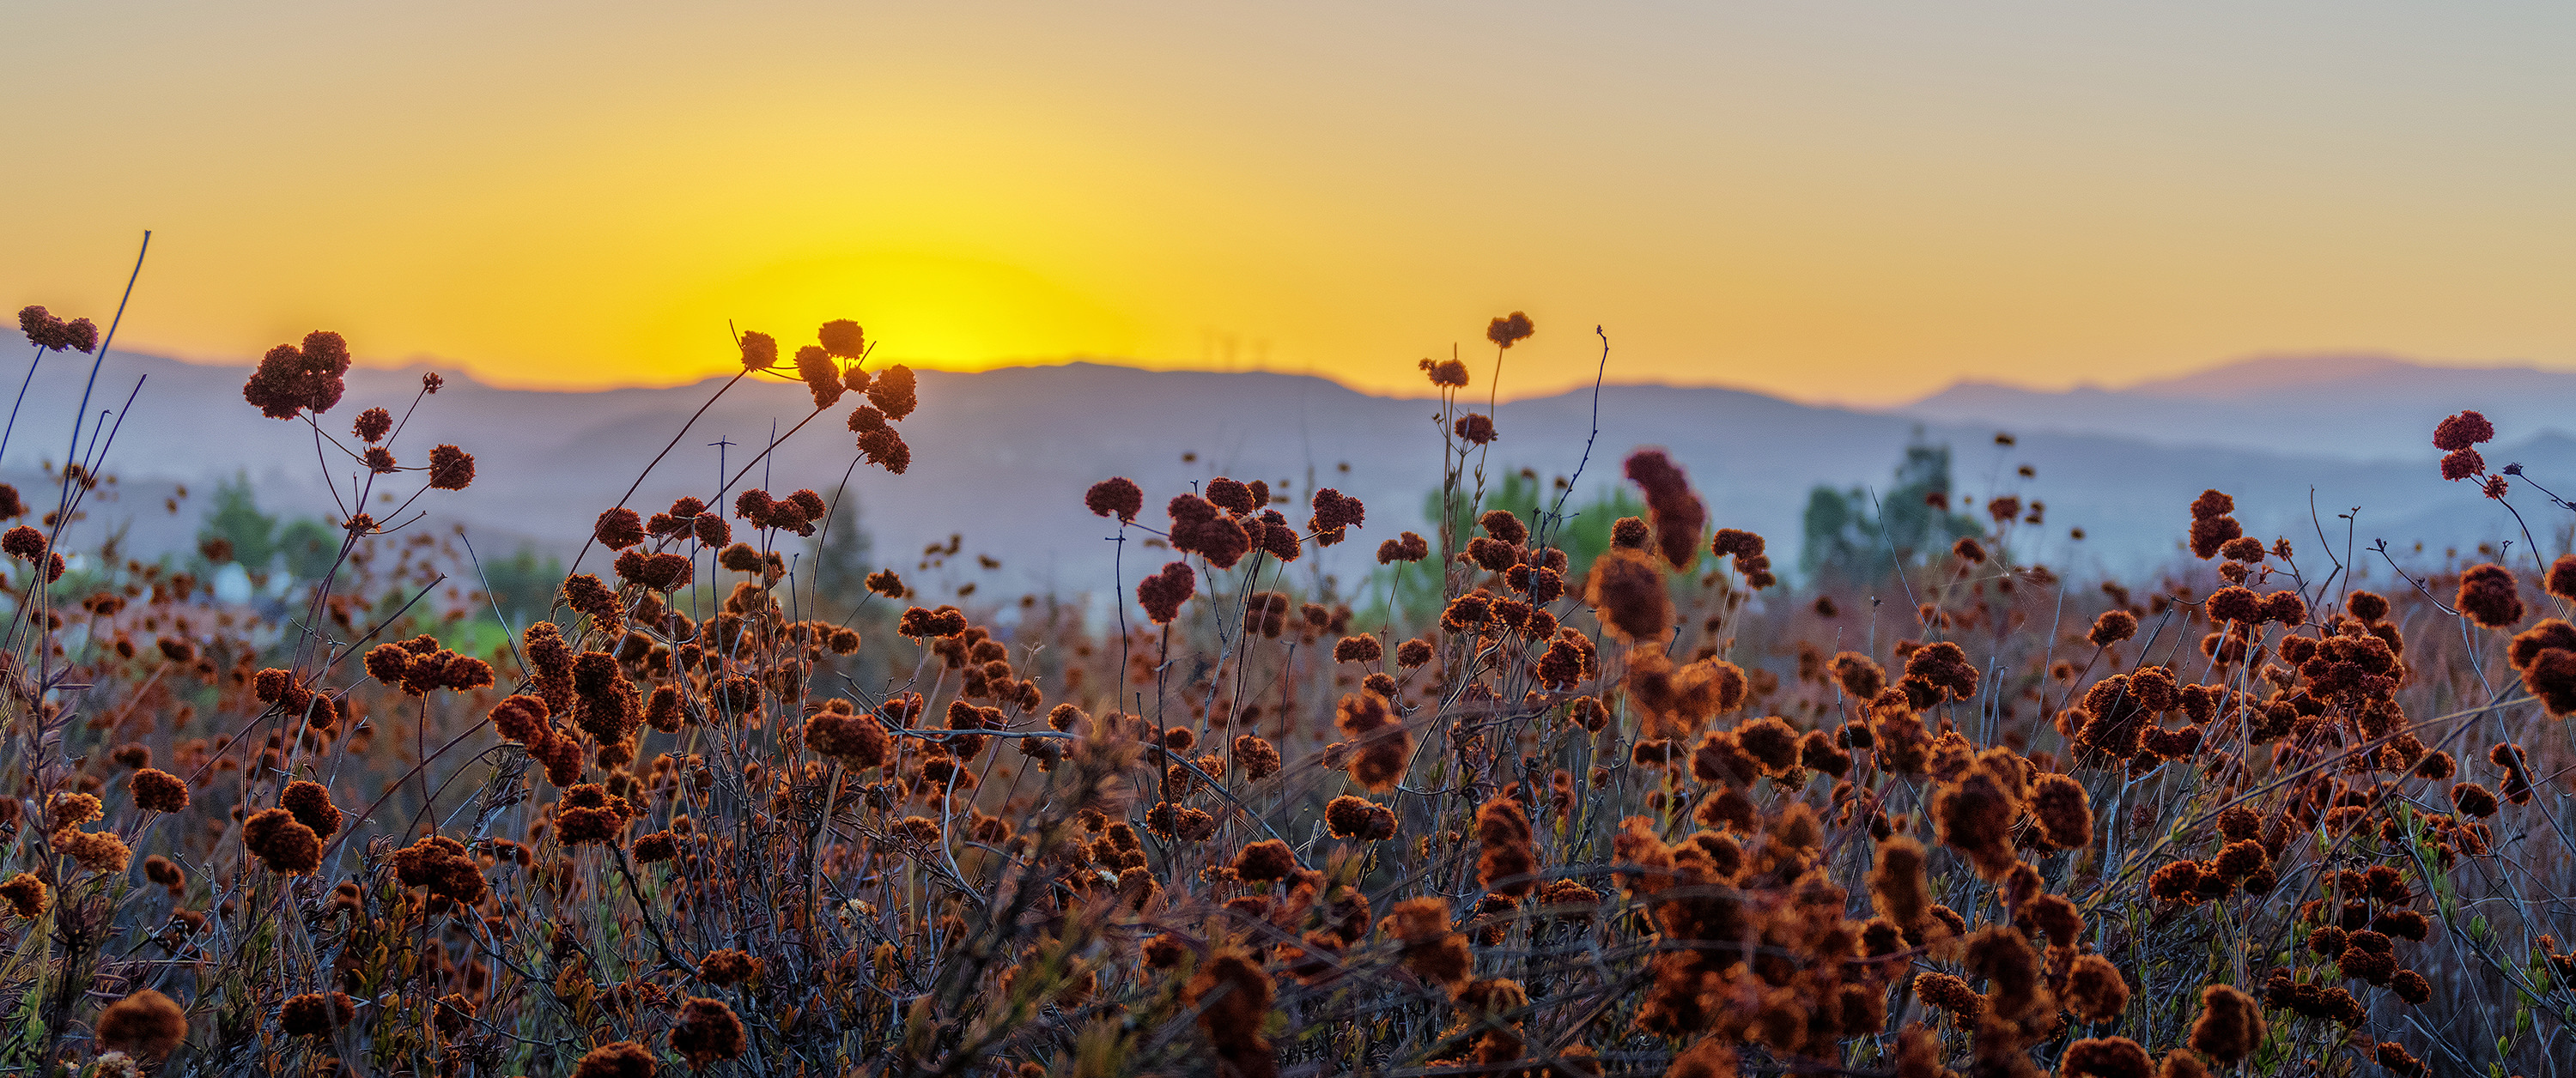 Sunrise In The Weeds